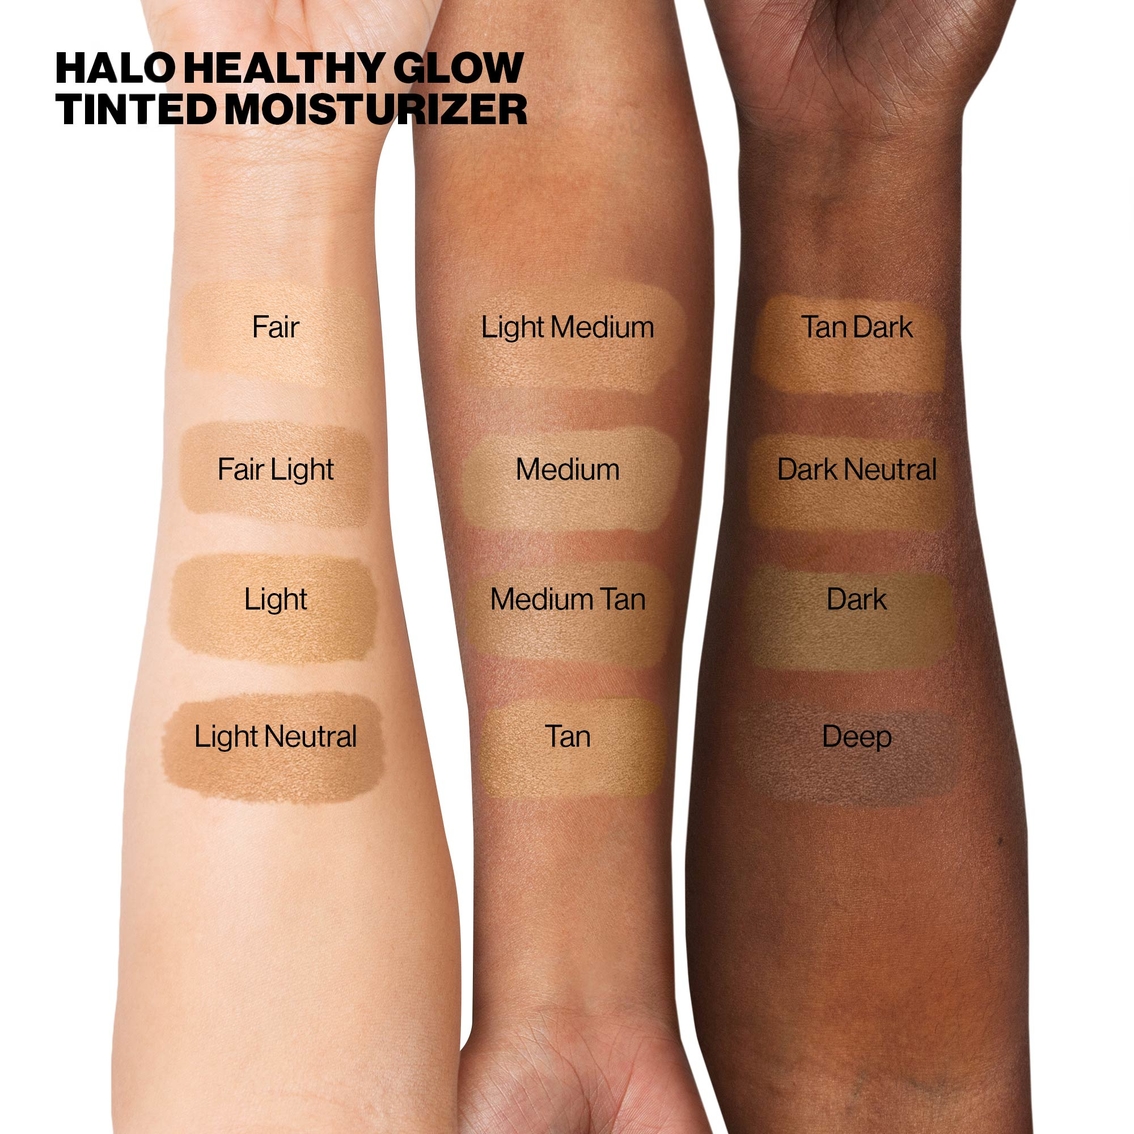 smashbox Halo Healthy Glow All-In-One Tinted Moisturizer SPF 25 - Image 7 of 10